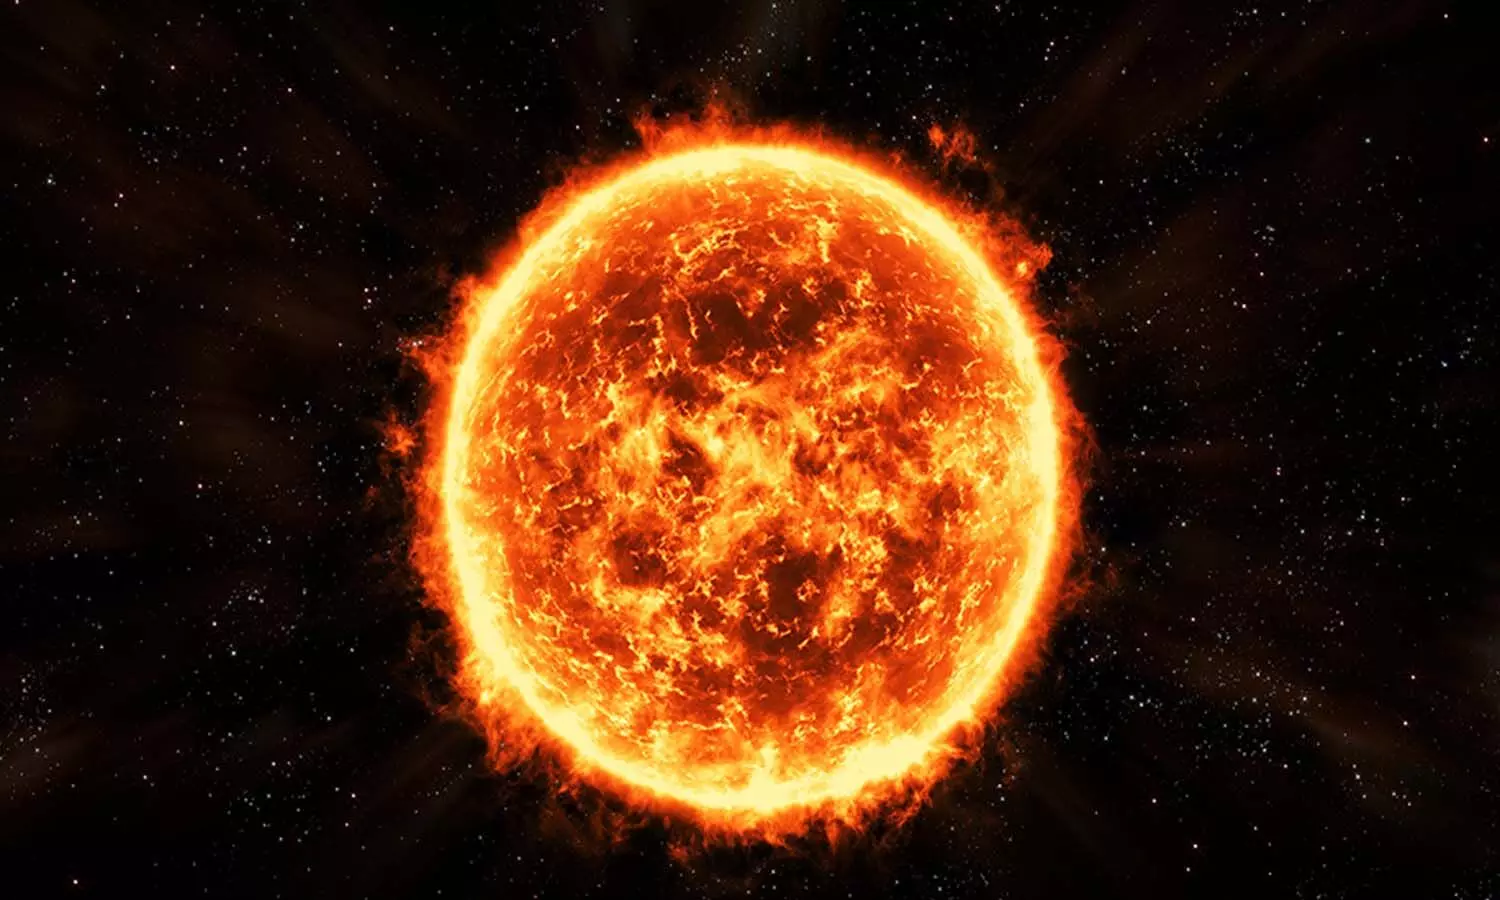 A Contradictory Claim on Sun Came from Indian Scientists